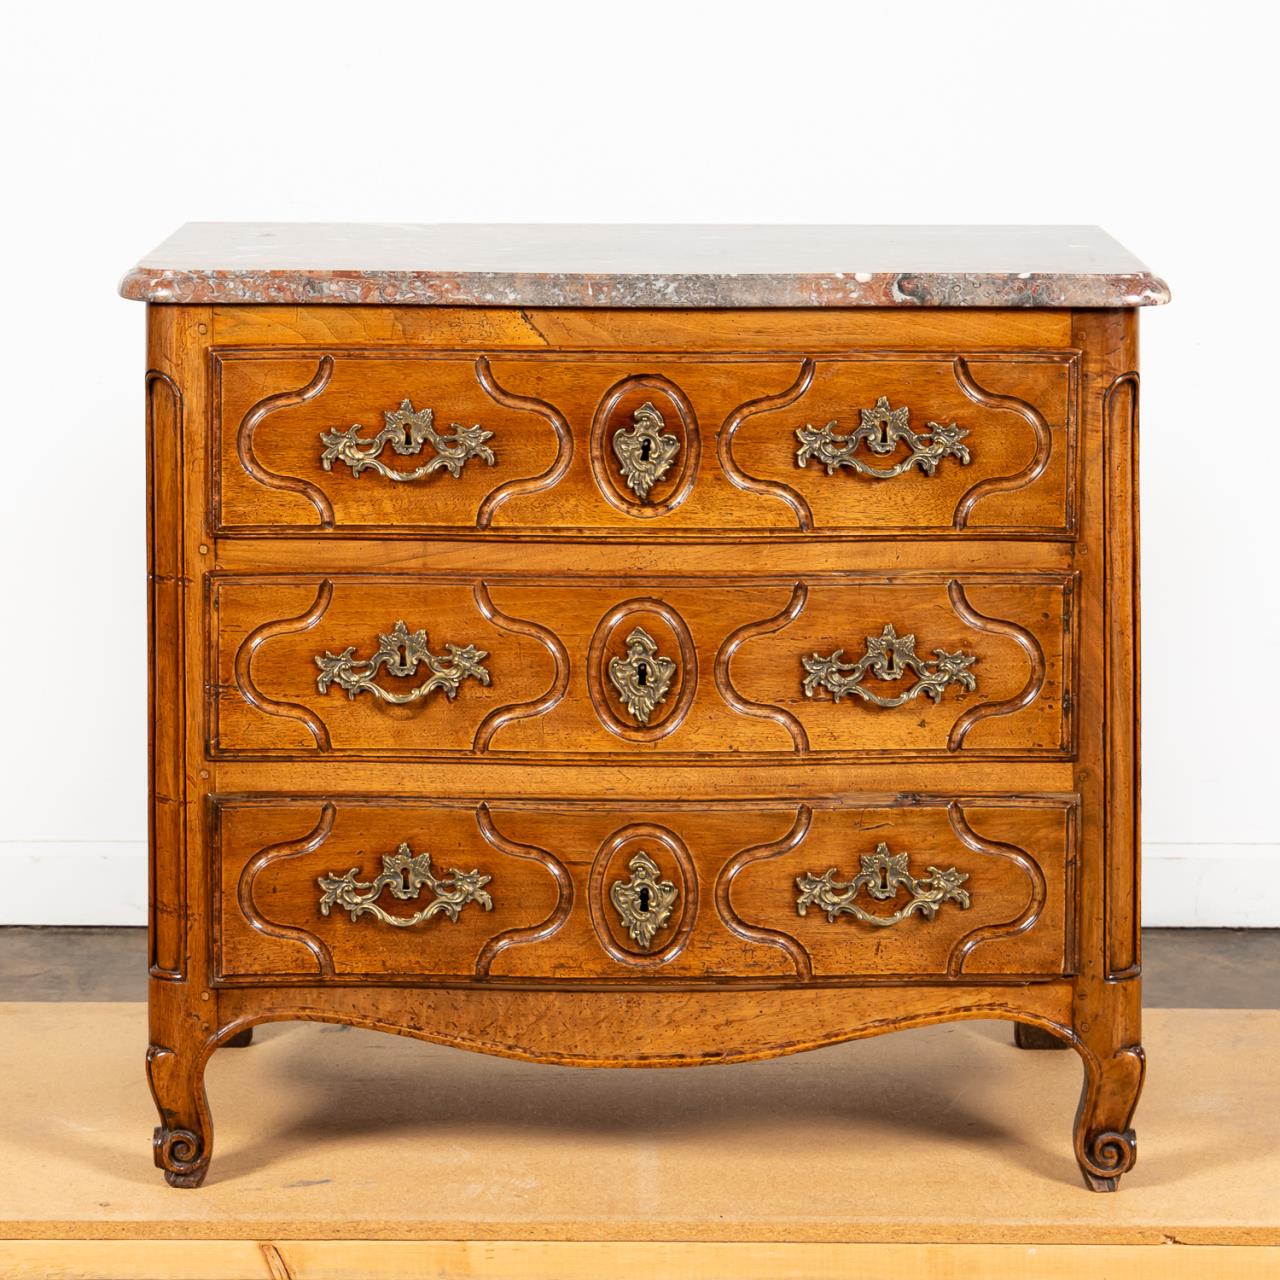 19TH C LOUIS XV STYLE MARBLE TOP 35a373